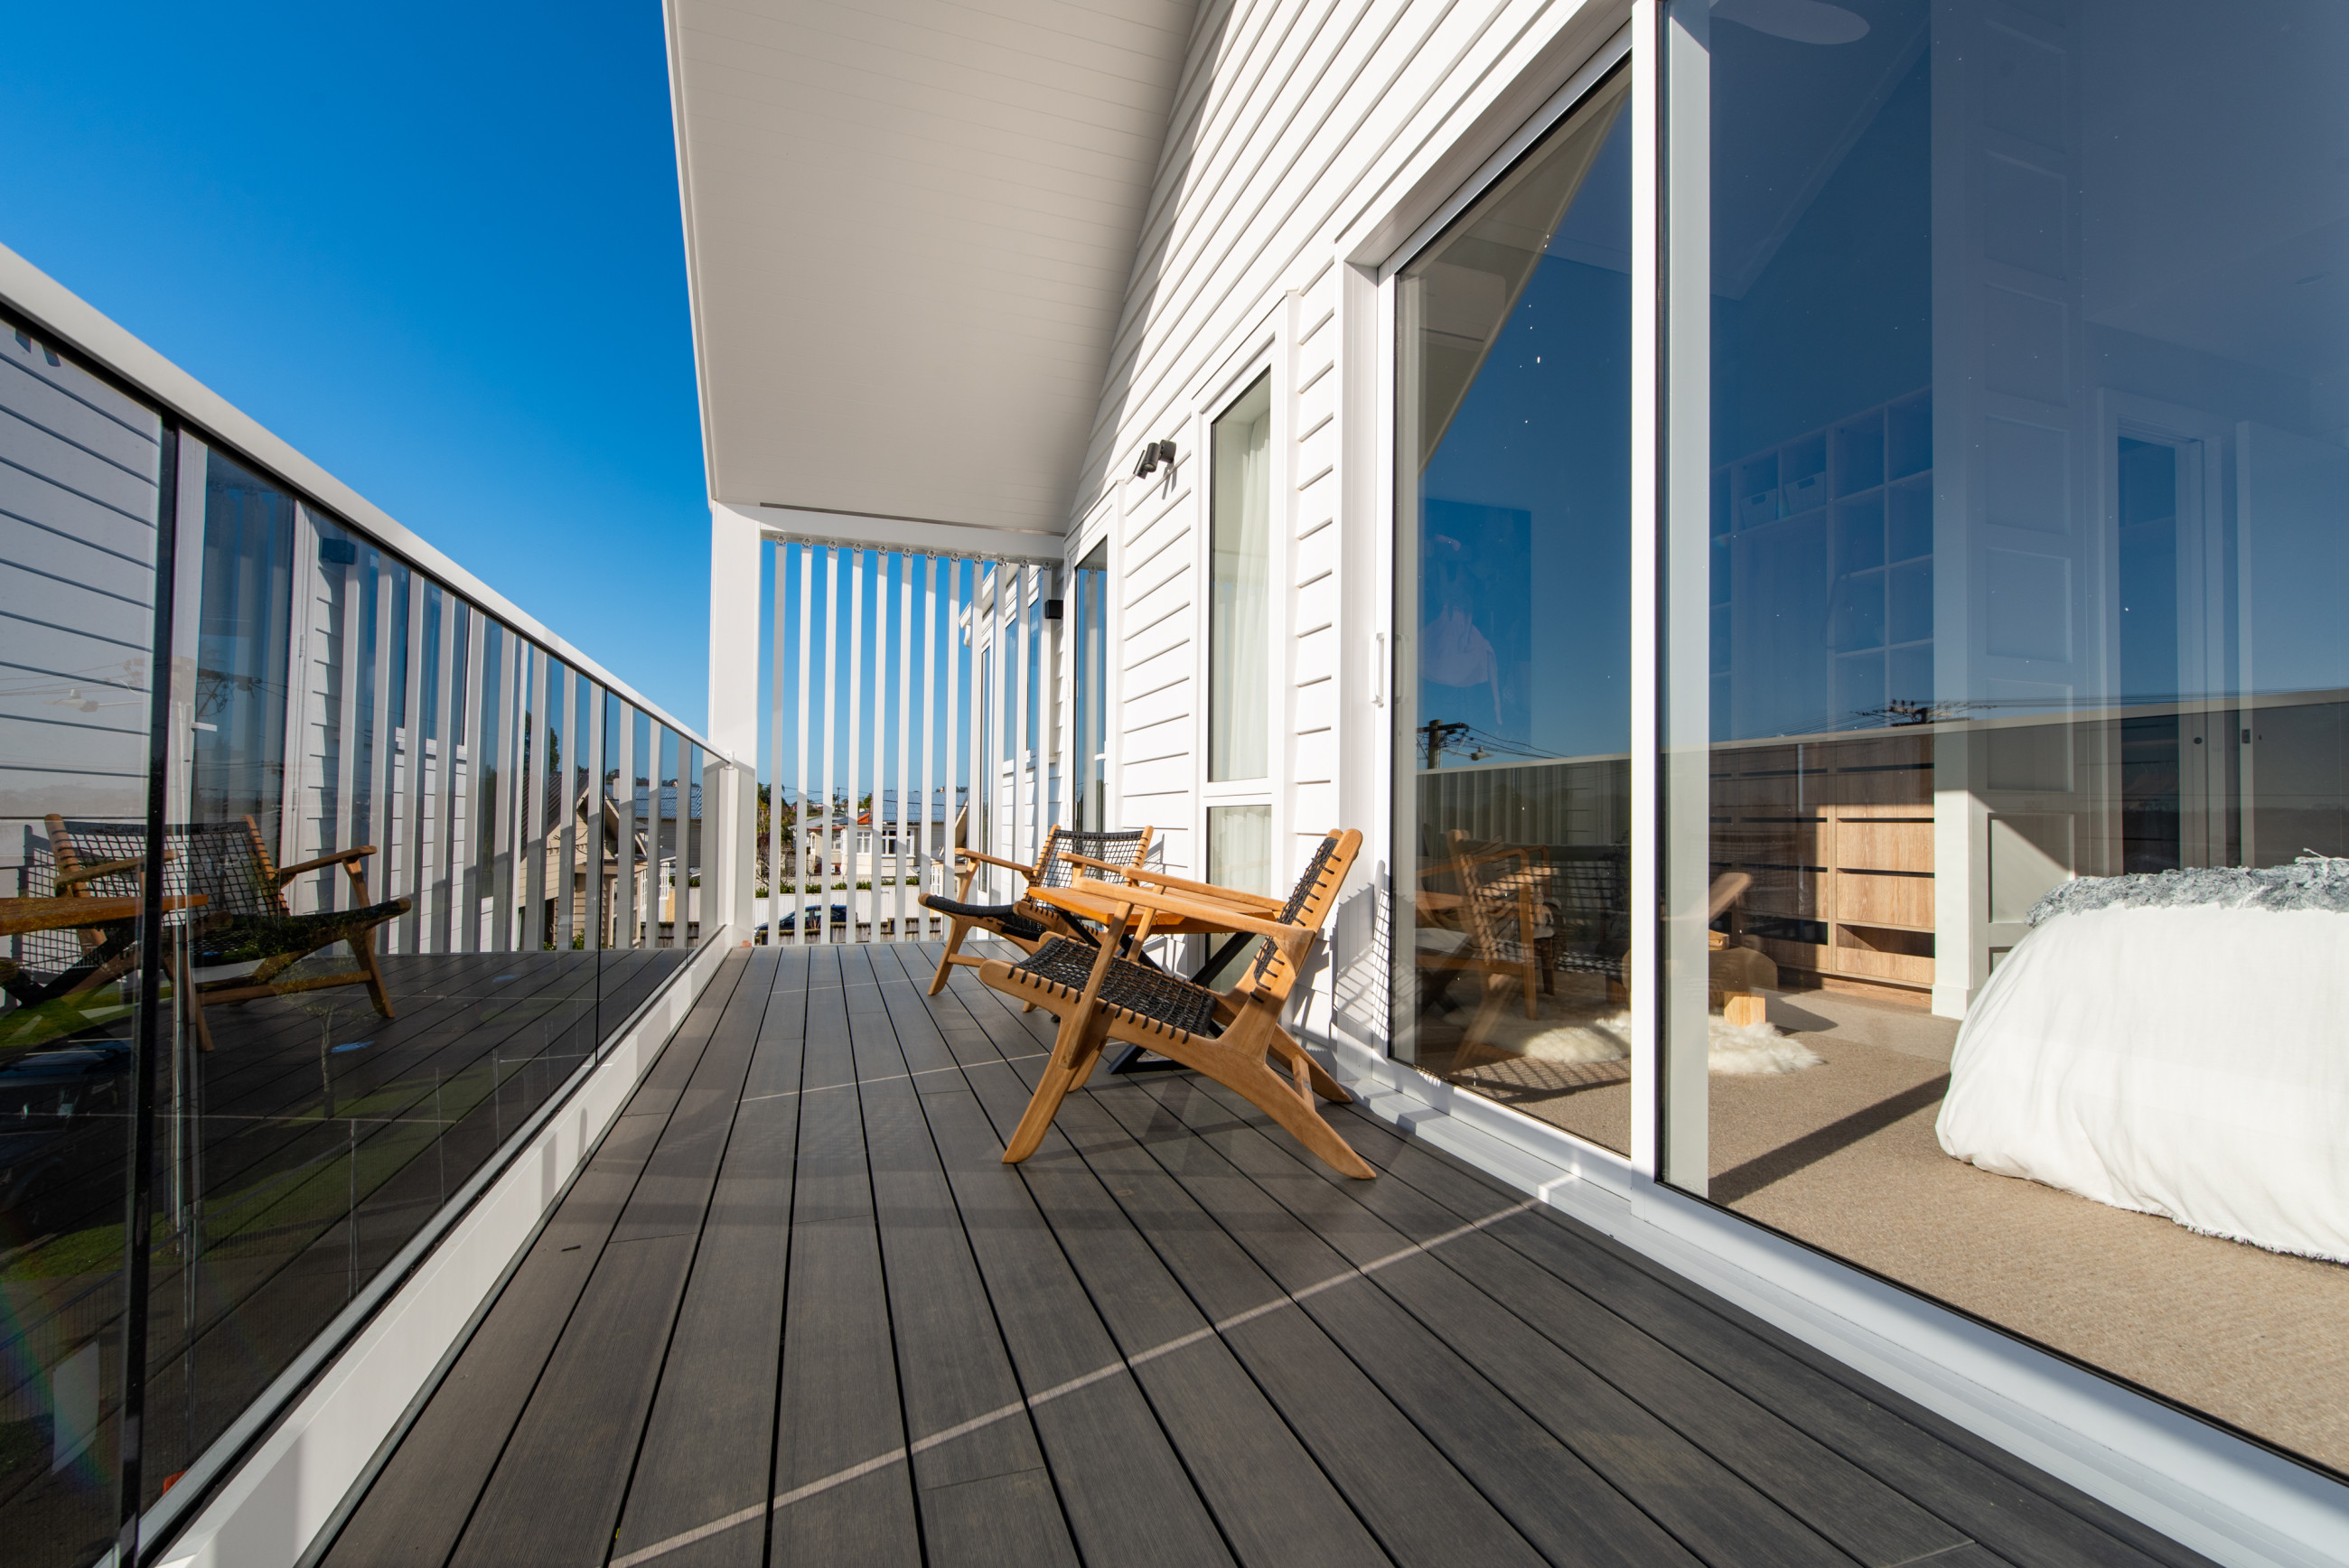 A deck with a chair in front of double glazed windows and doors.